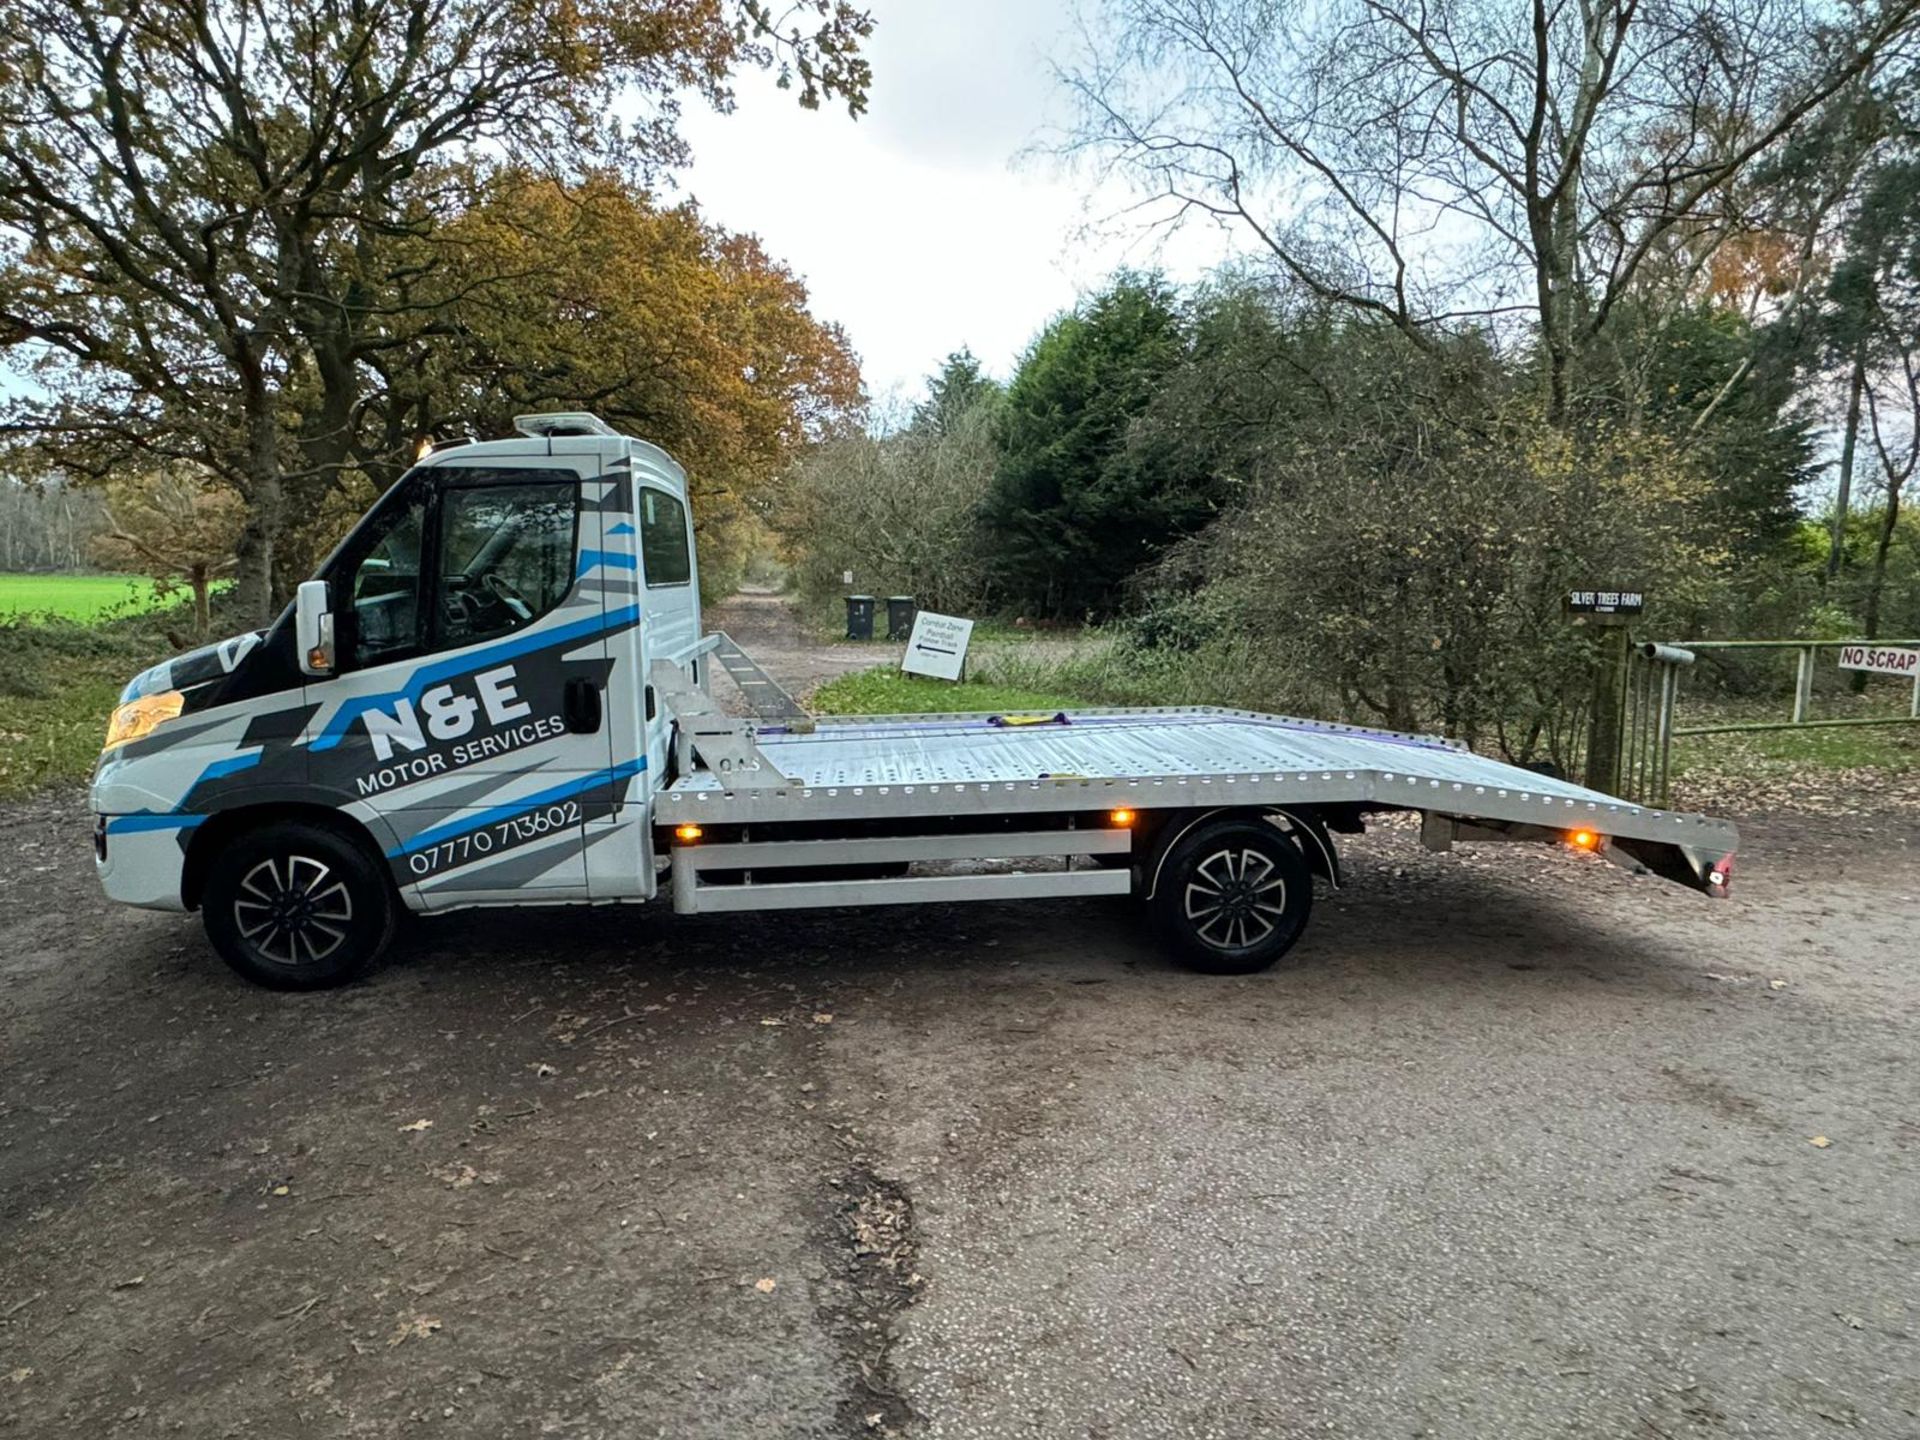 2018 18 IVECO DAILY RECOVERY TRUCK - 3.5 TON - LWB CHASSIS 3750 WHEE BASE - 127K MILES - Image 6 of 10